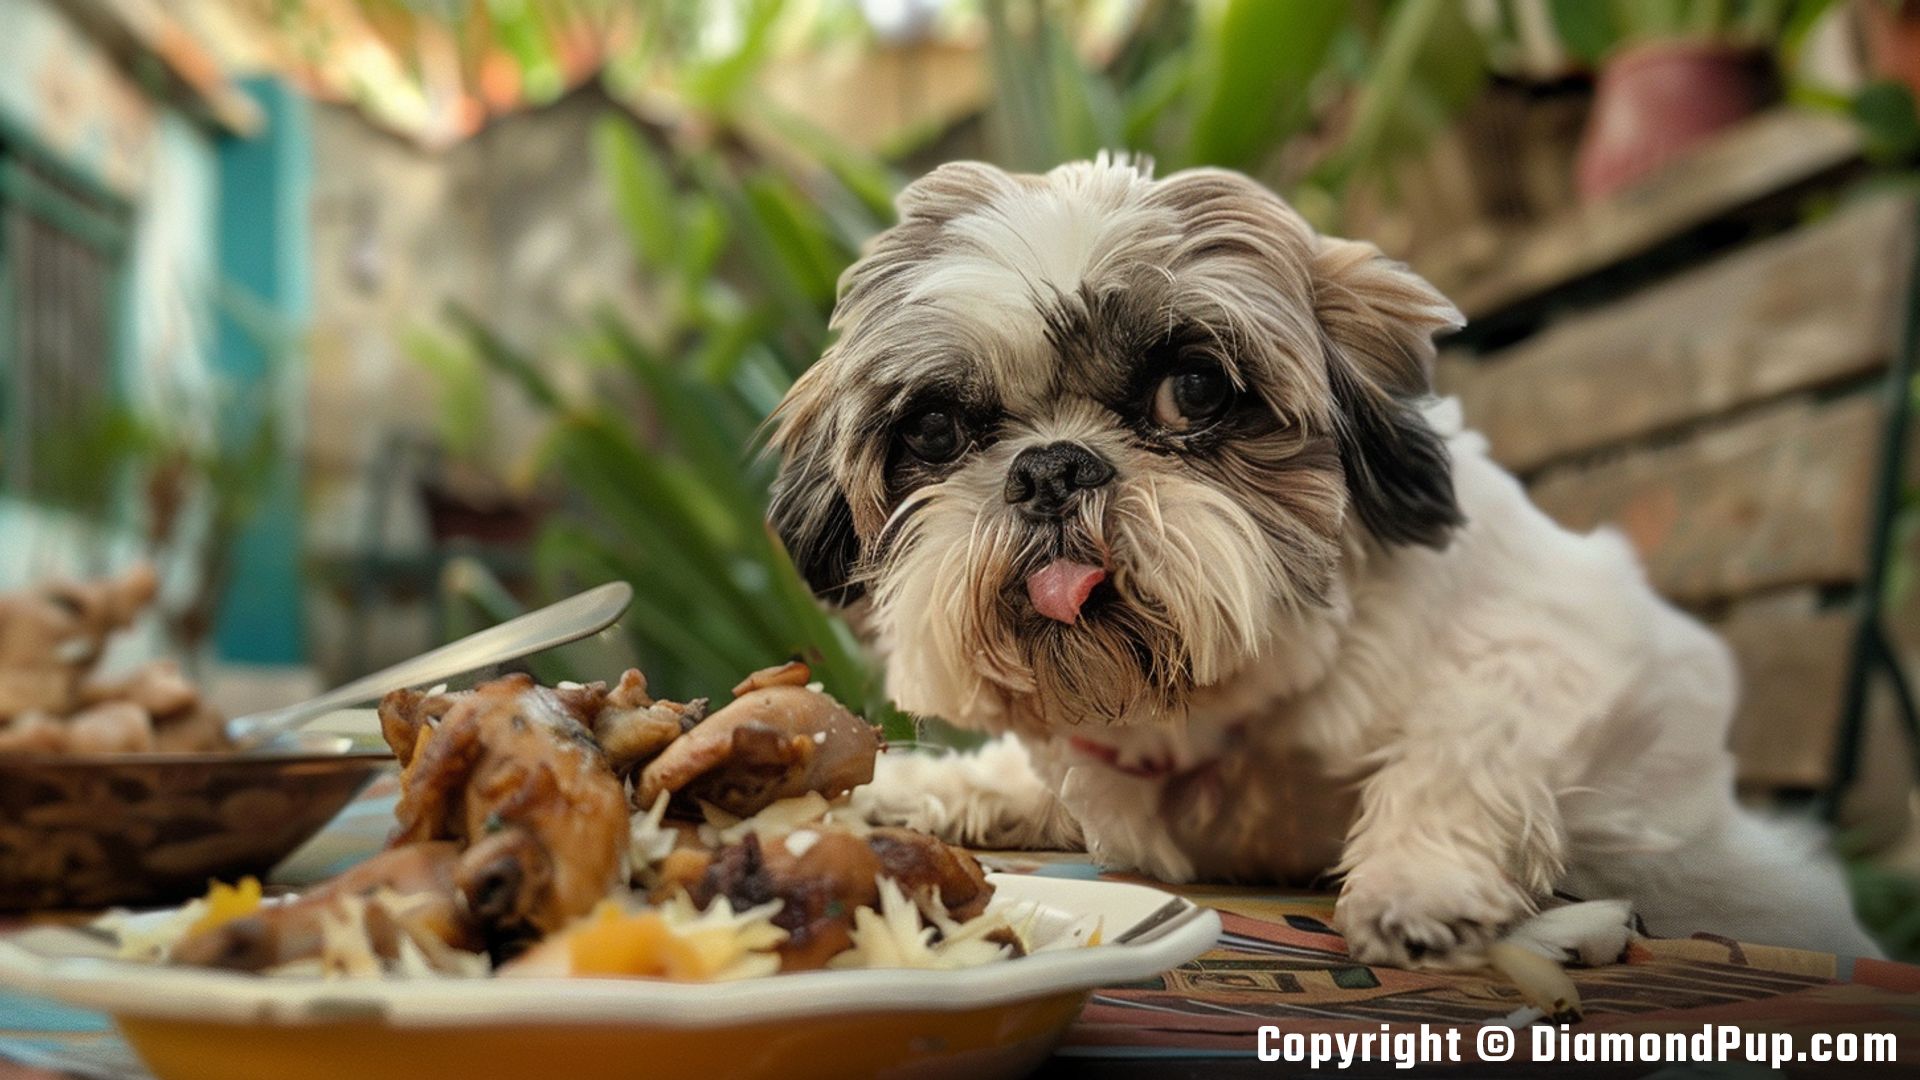 Photo of a Playful Shih Tzu Eating Chicken